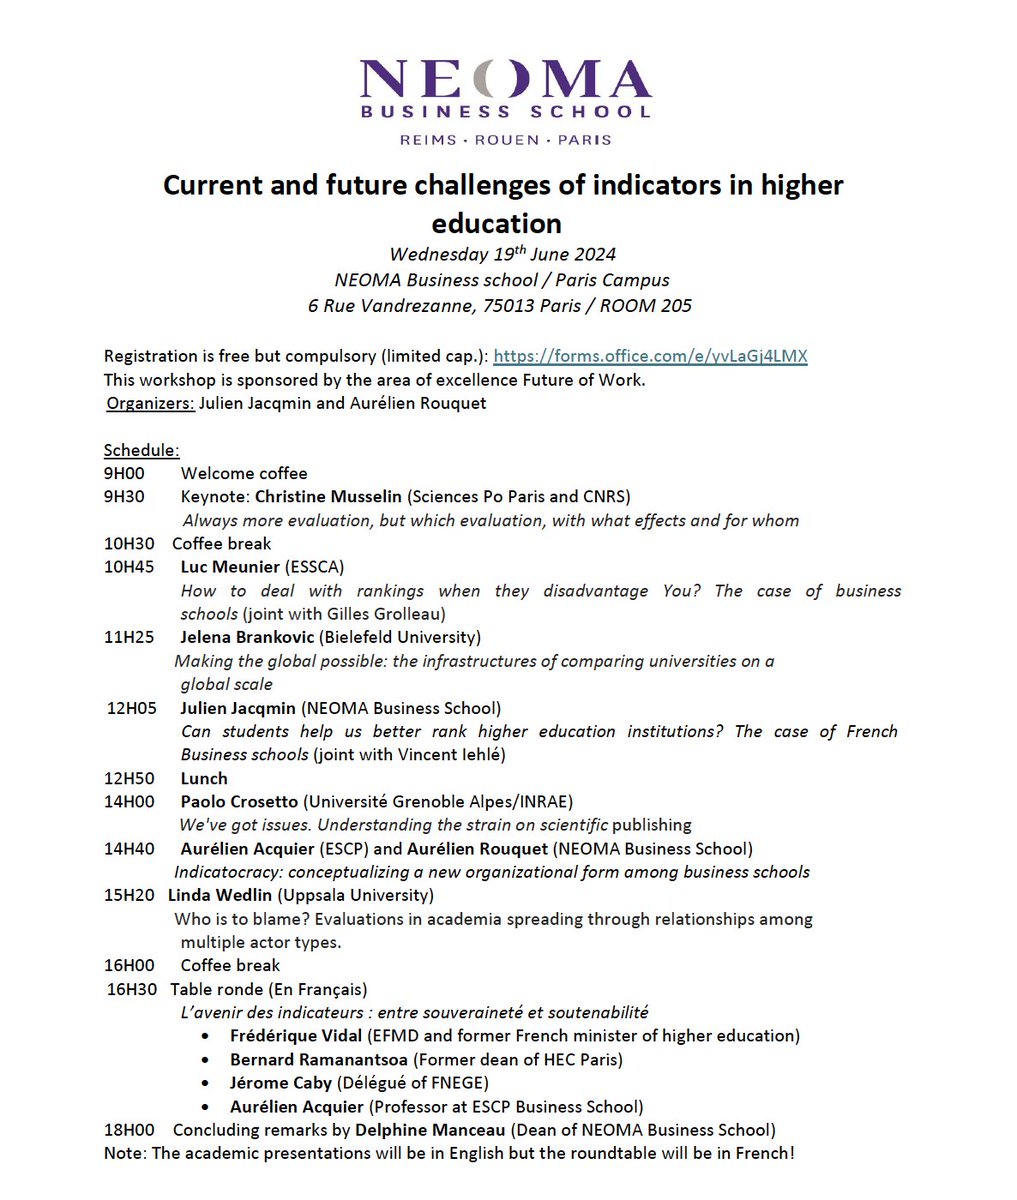 Interested in discussing the challenges of indicators in higher ed. with economists, sociologists & business scholars? Join us at @NEOMAbs Paris campus for this workshop on June 19th. ft. a.o. @PaoloCrosetto @jelena3121  @MusselinC @aacquier @VidalFrederique